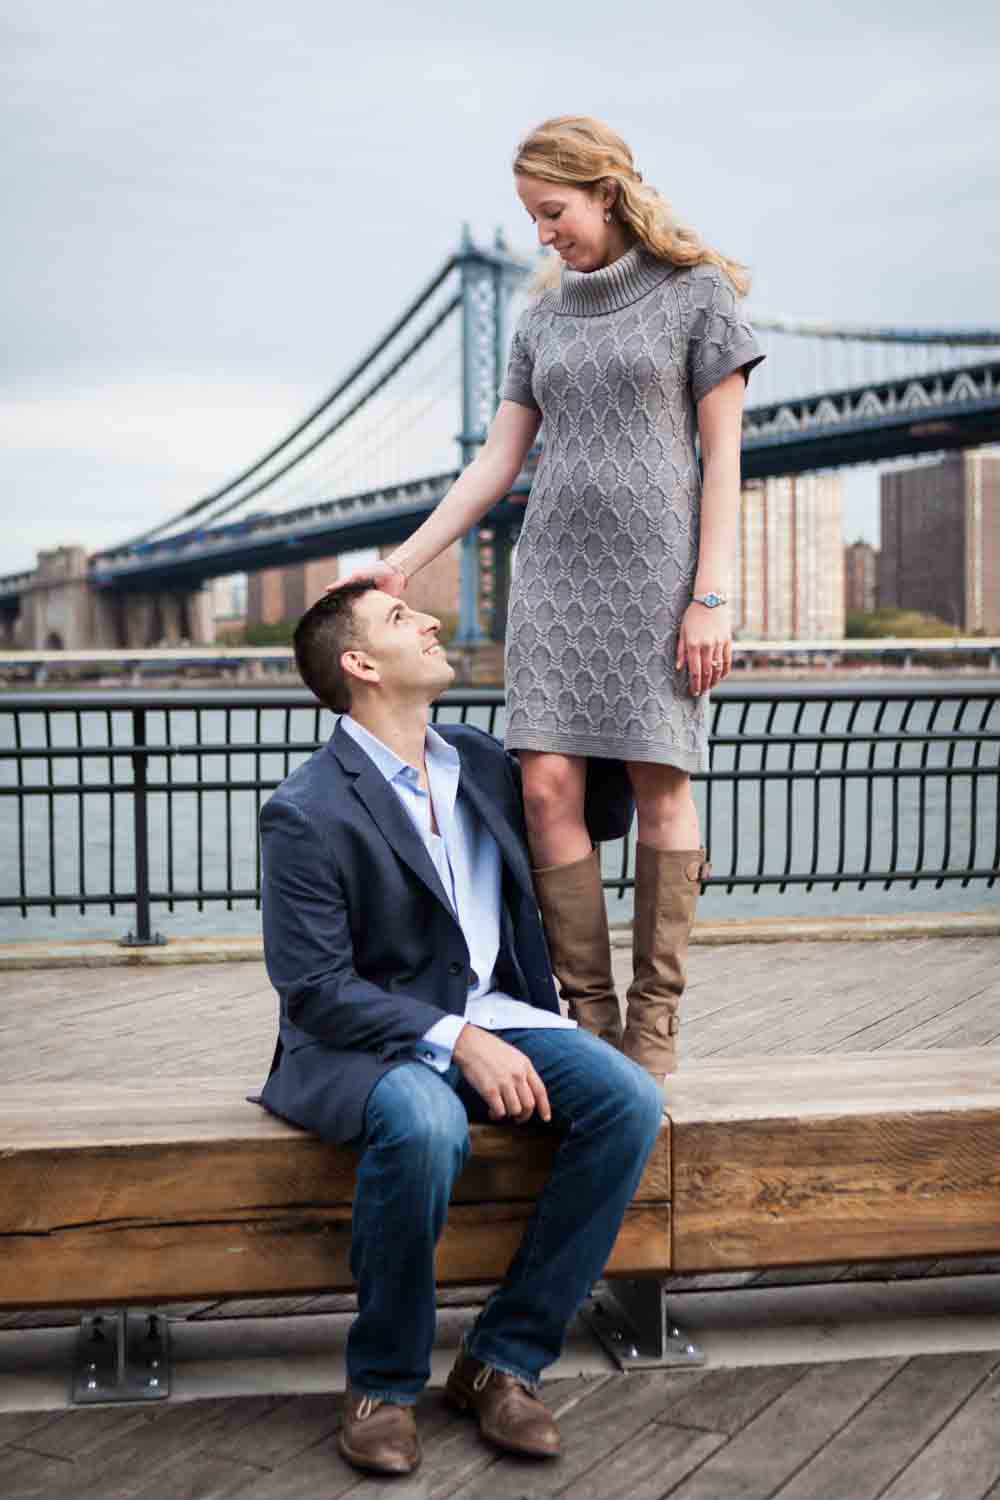 Man sitting on bench looking up at woman during a Brooklyn Bridge Park engagement shoot